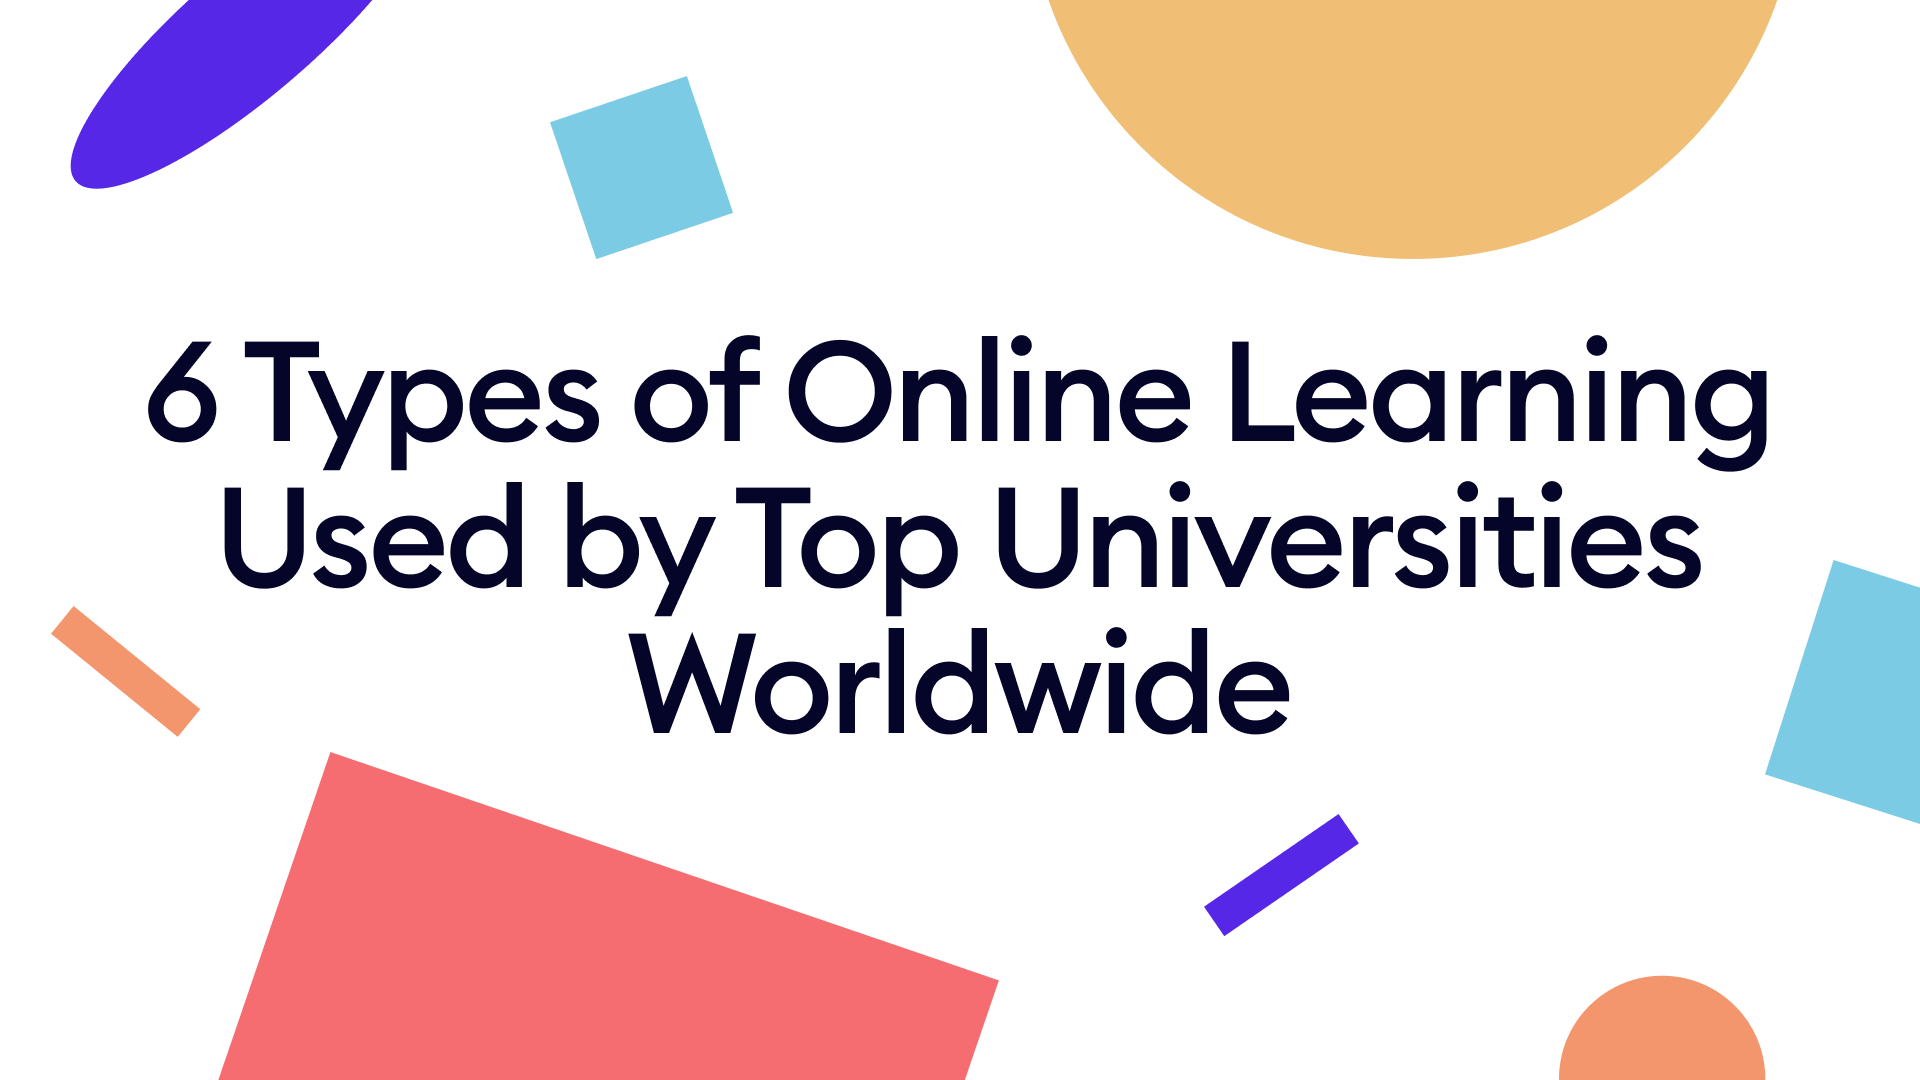 6 types of online learning used by top universities worldwide